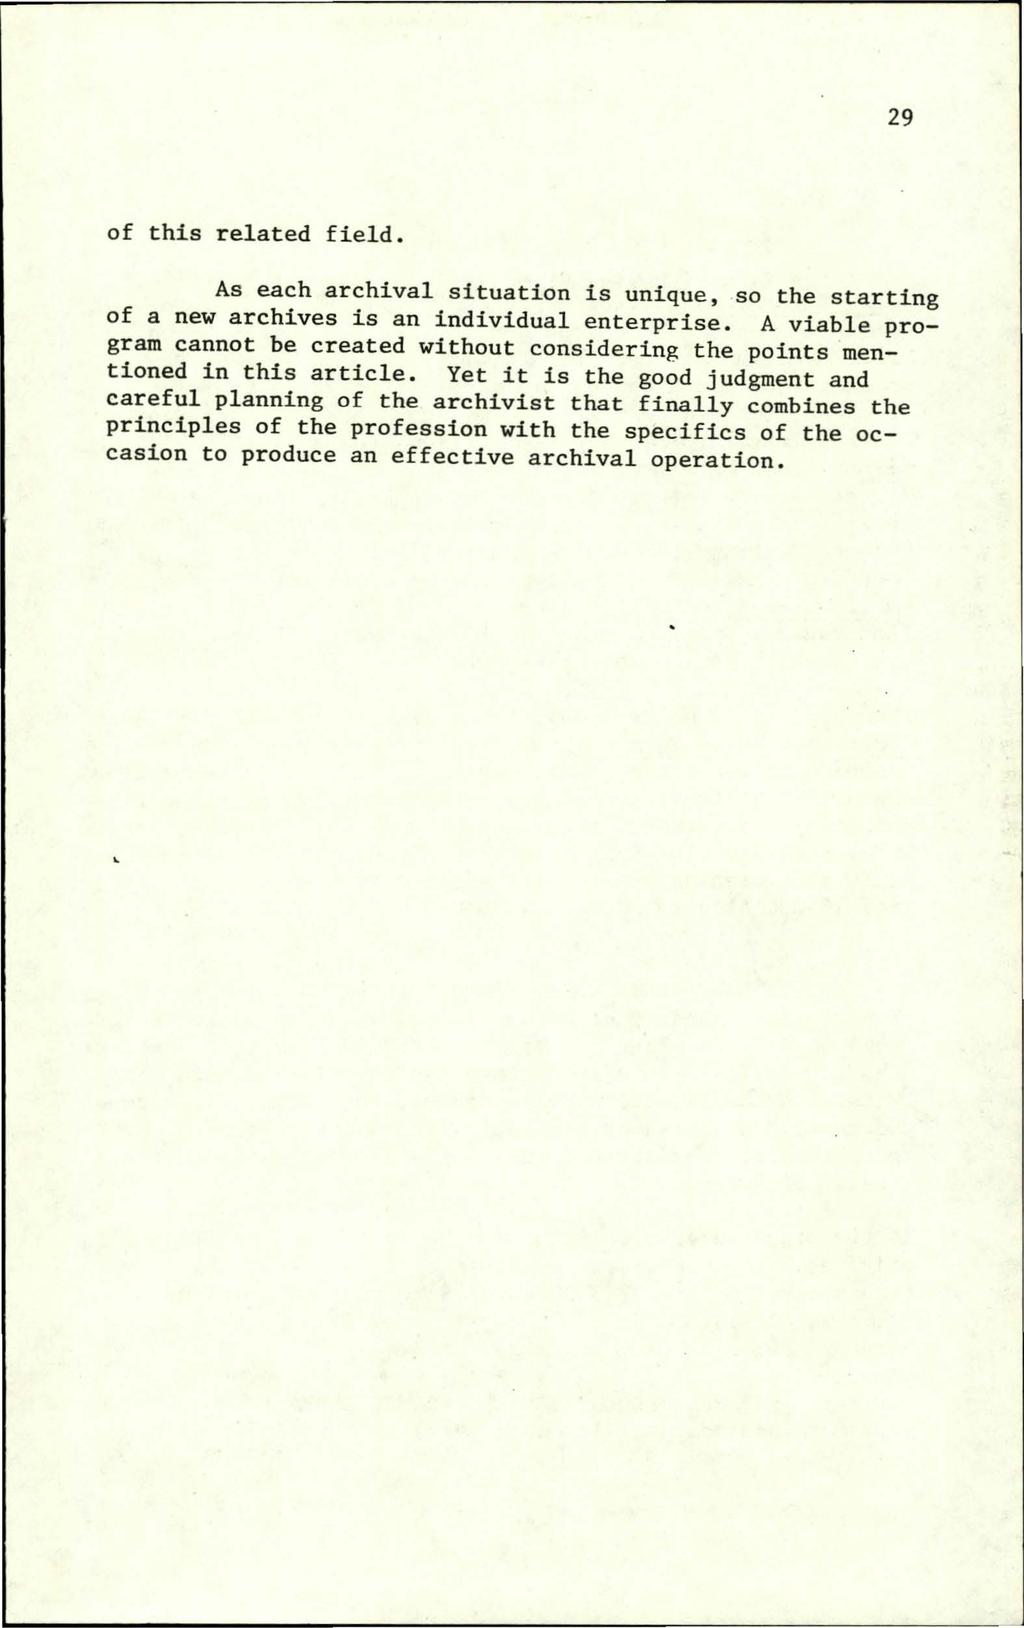 Georgia Archive, Vol. 1 [1973], No. 1, Art. 4 29 of this related field. As each archival situation is unique, so the starting of a new archives is an individual enterprise.